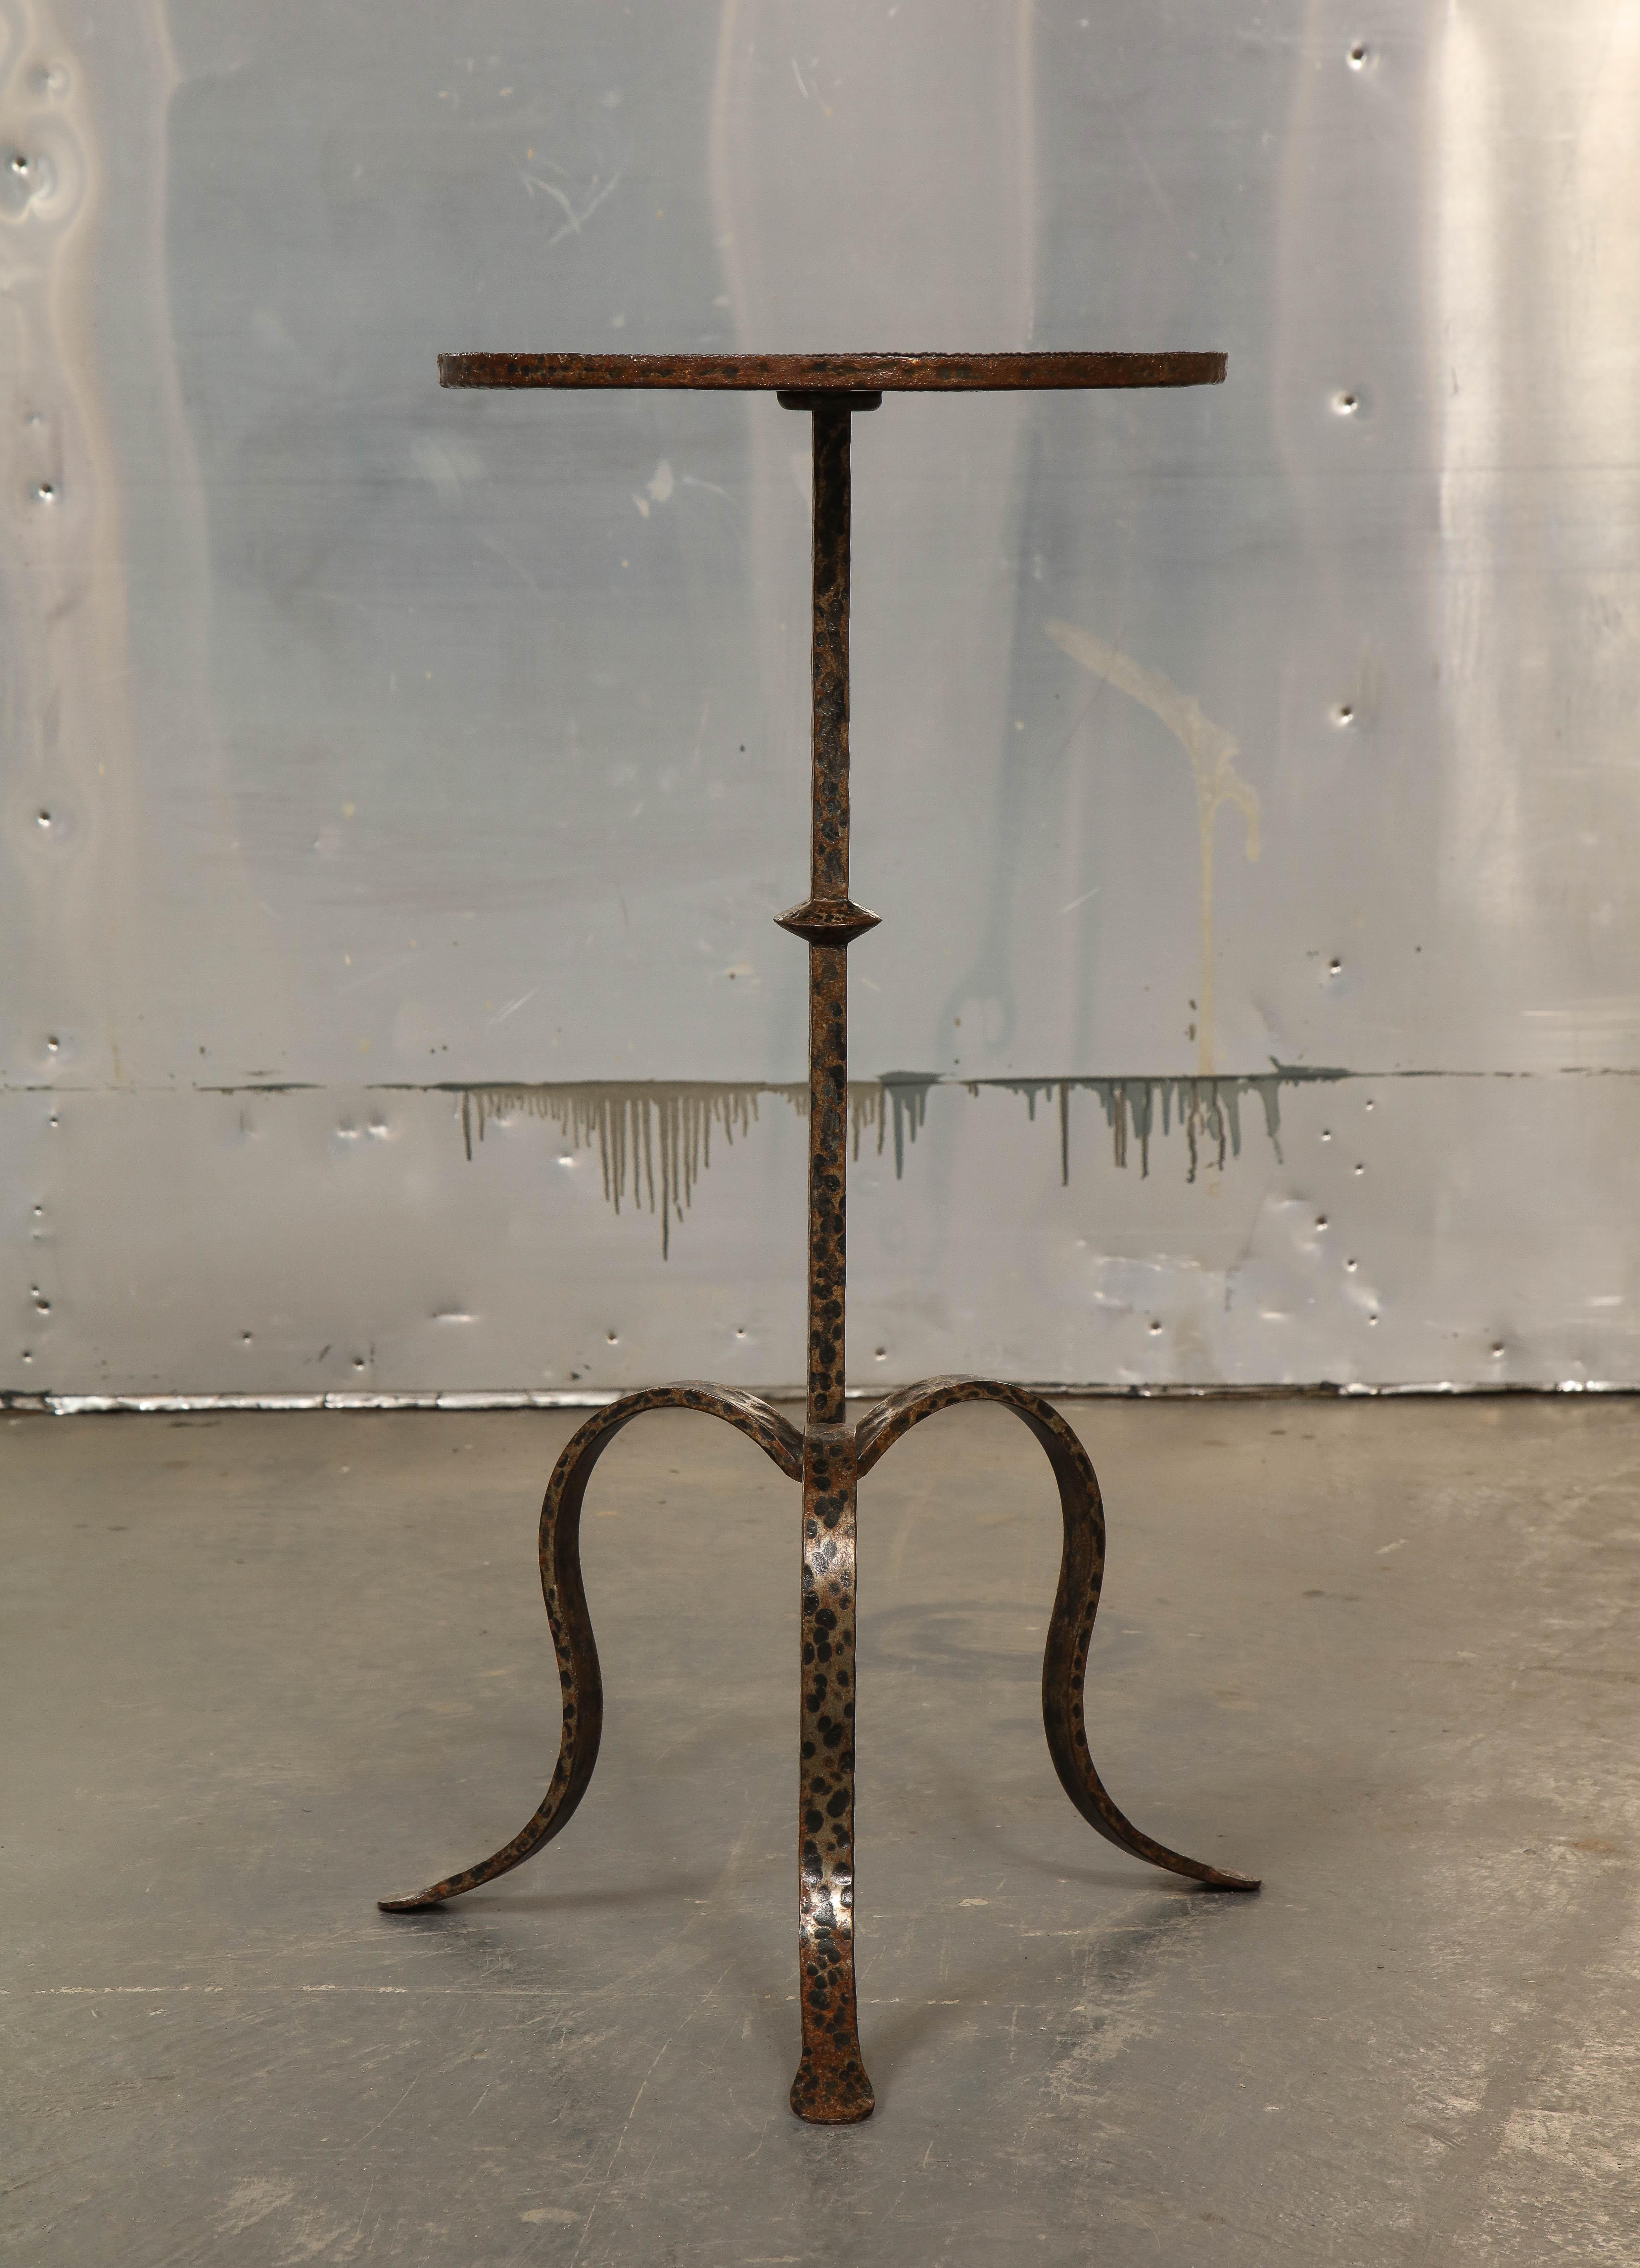 Metal surface attractively patinated a copper color, the dished circular top raised on an attenuated pedestal raised on three downswept legs with pad feet.